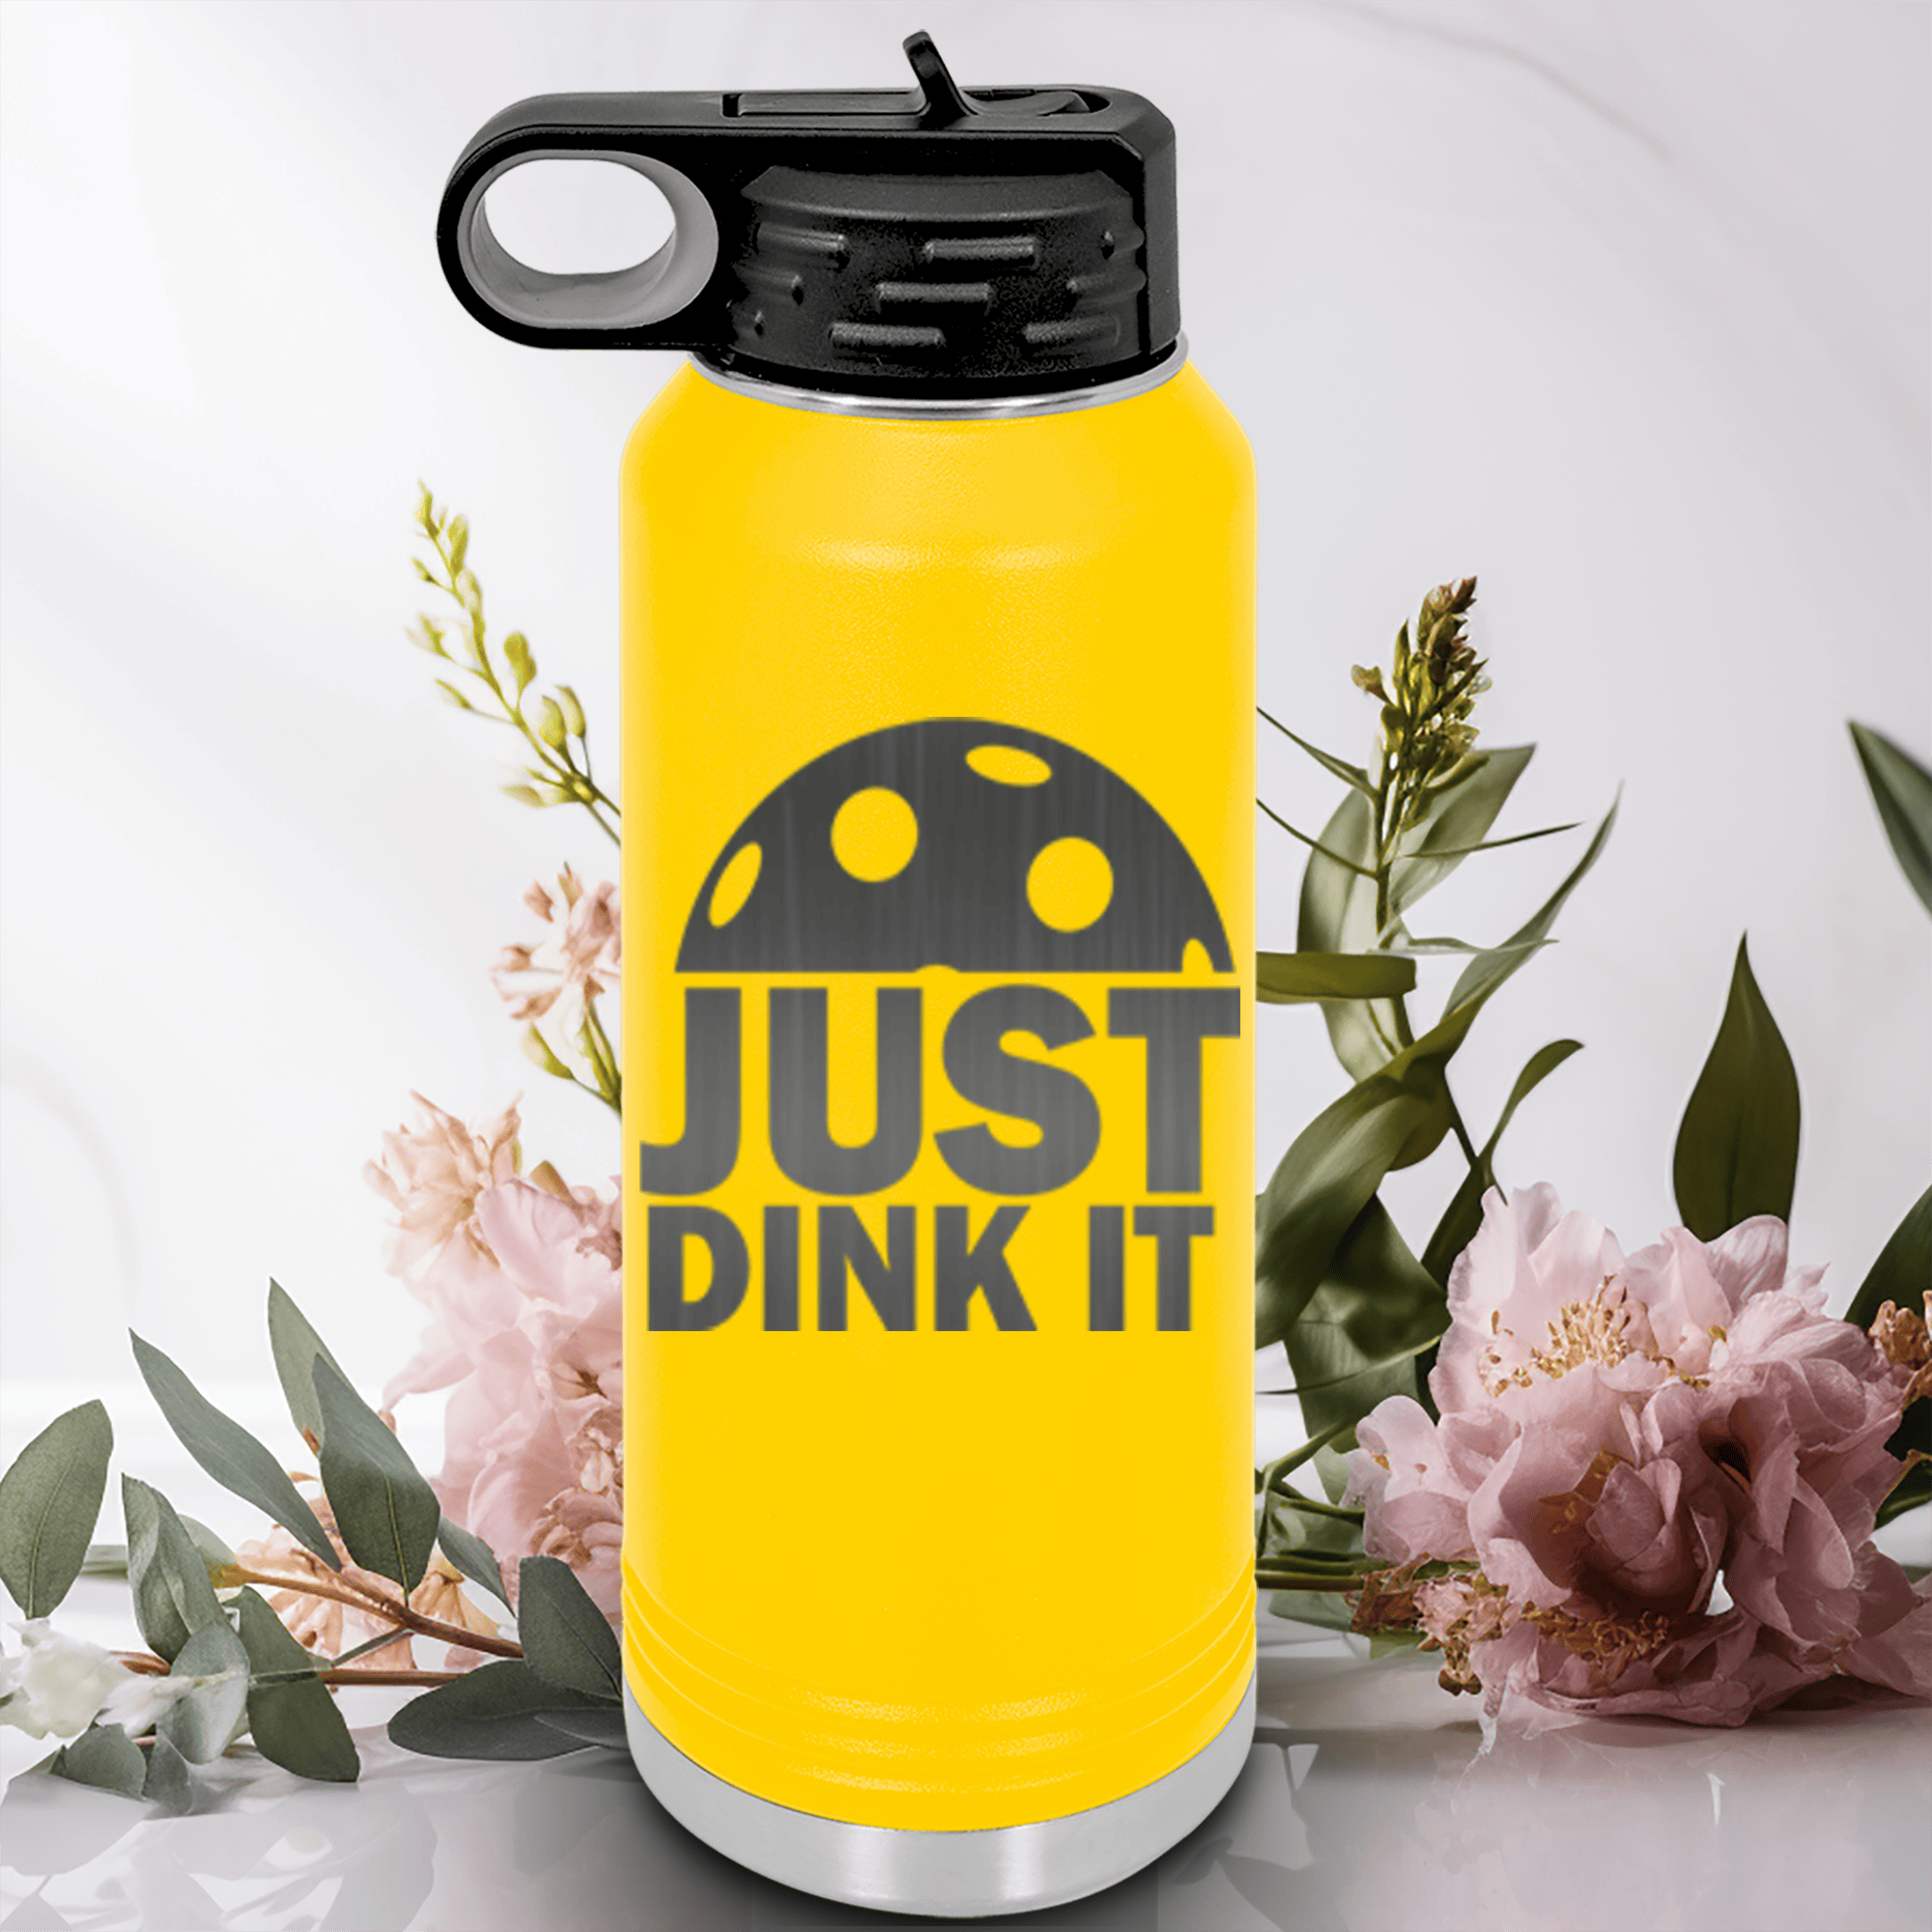 Yellow Pickleball Water Bottle With Just Dink It Design